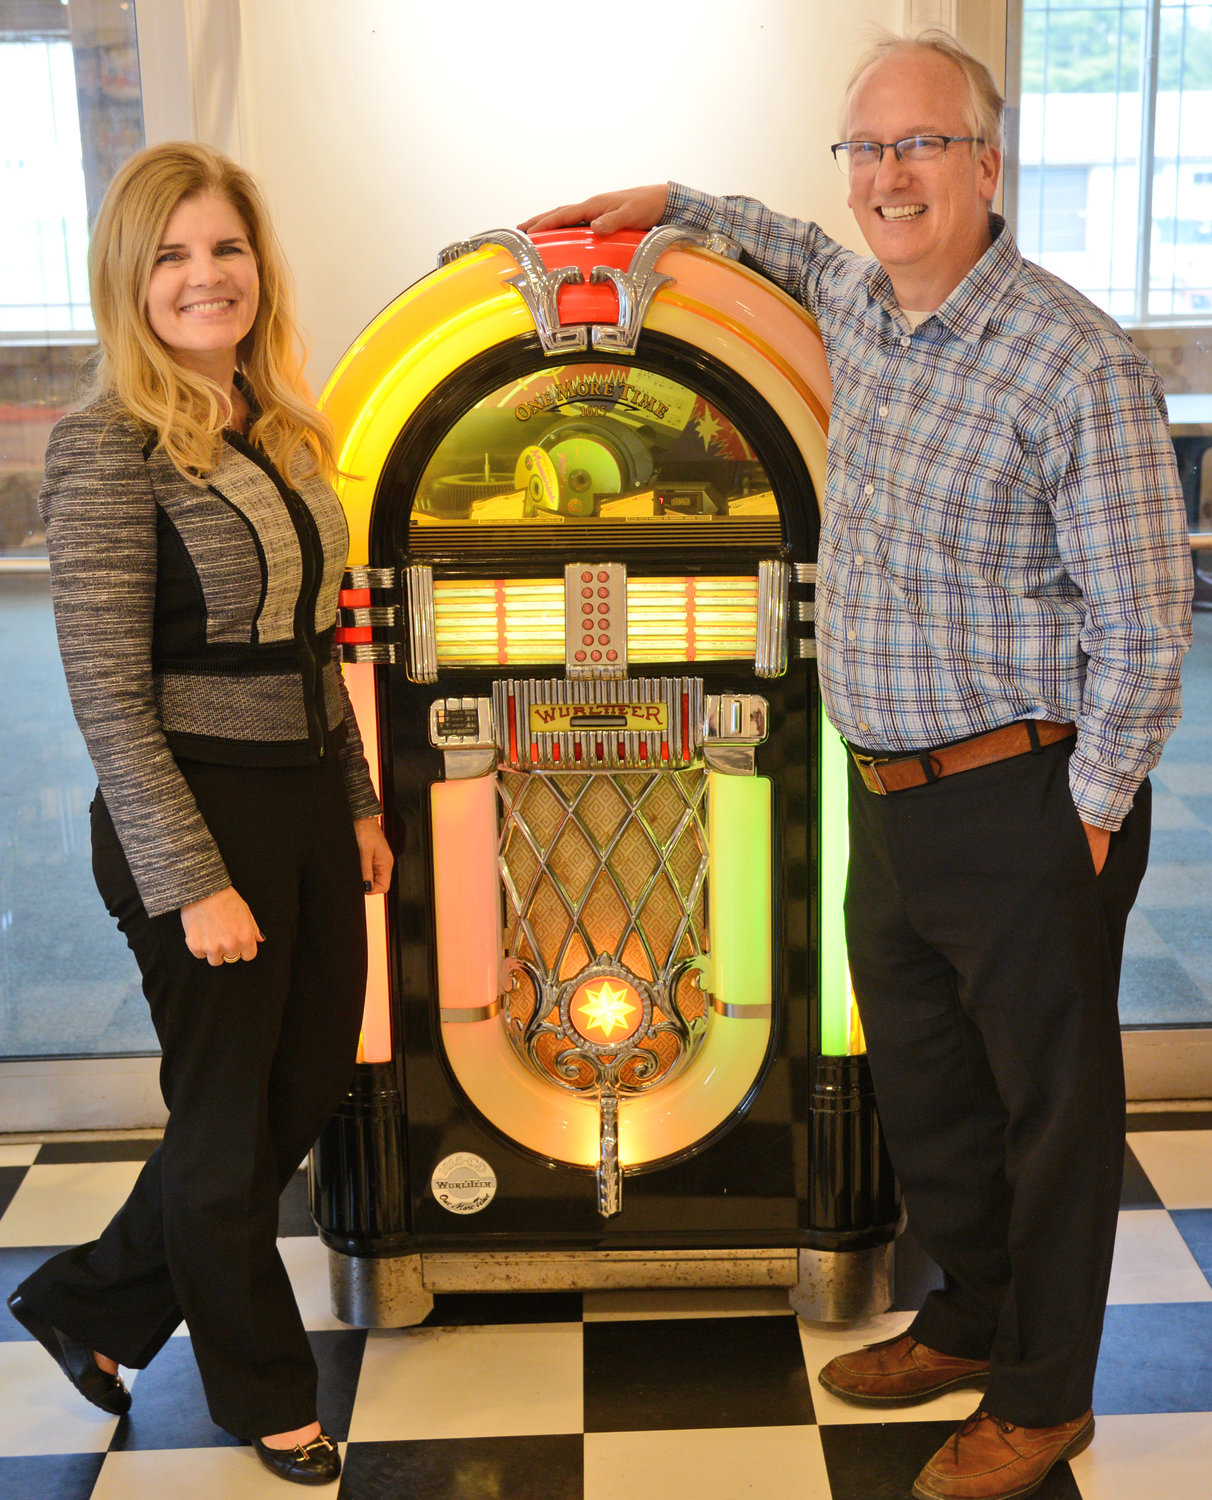 READY FOR REPLAY — Lynn and Steve Boucher stand next to an iconic Wurlitzer juke box at the Soda Fountain in Remsen. The popular family eatery with a retro motif is ready to reopen and serve a variety of traditional, homestyle favorites.